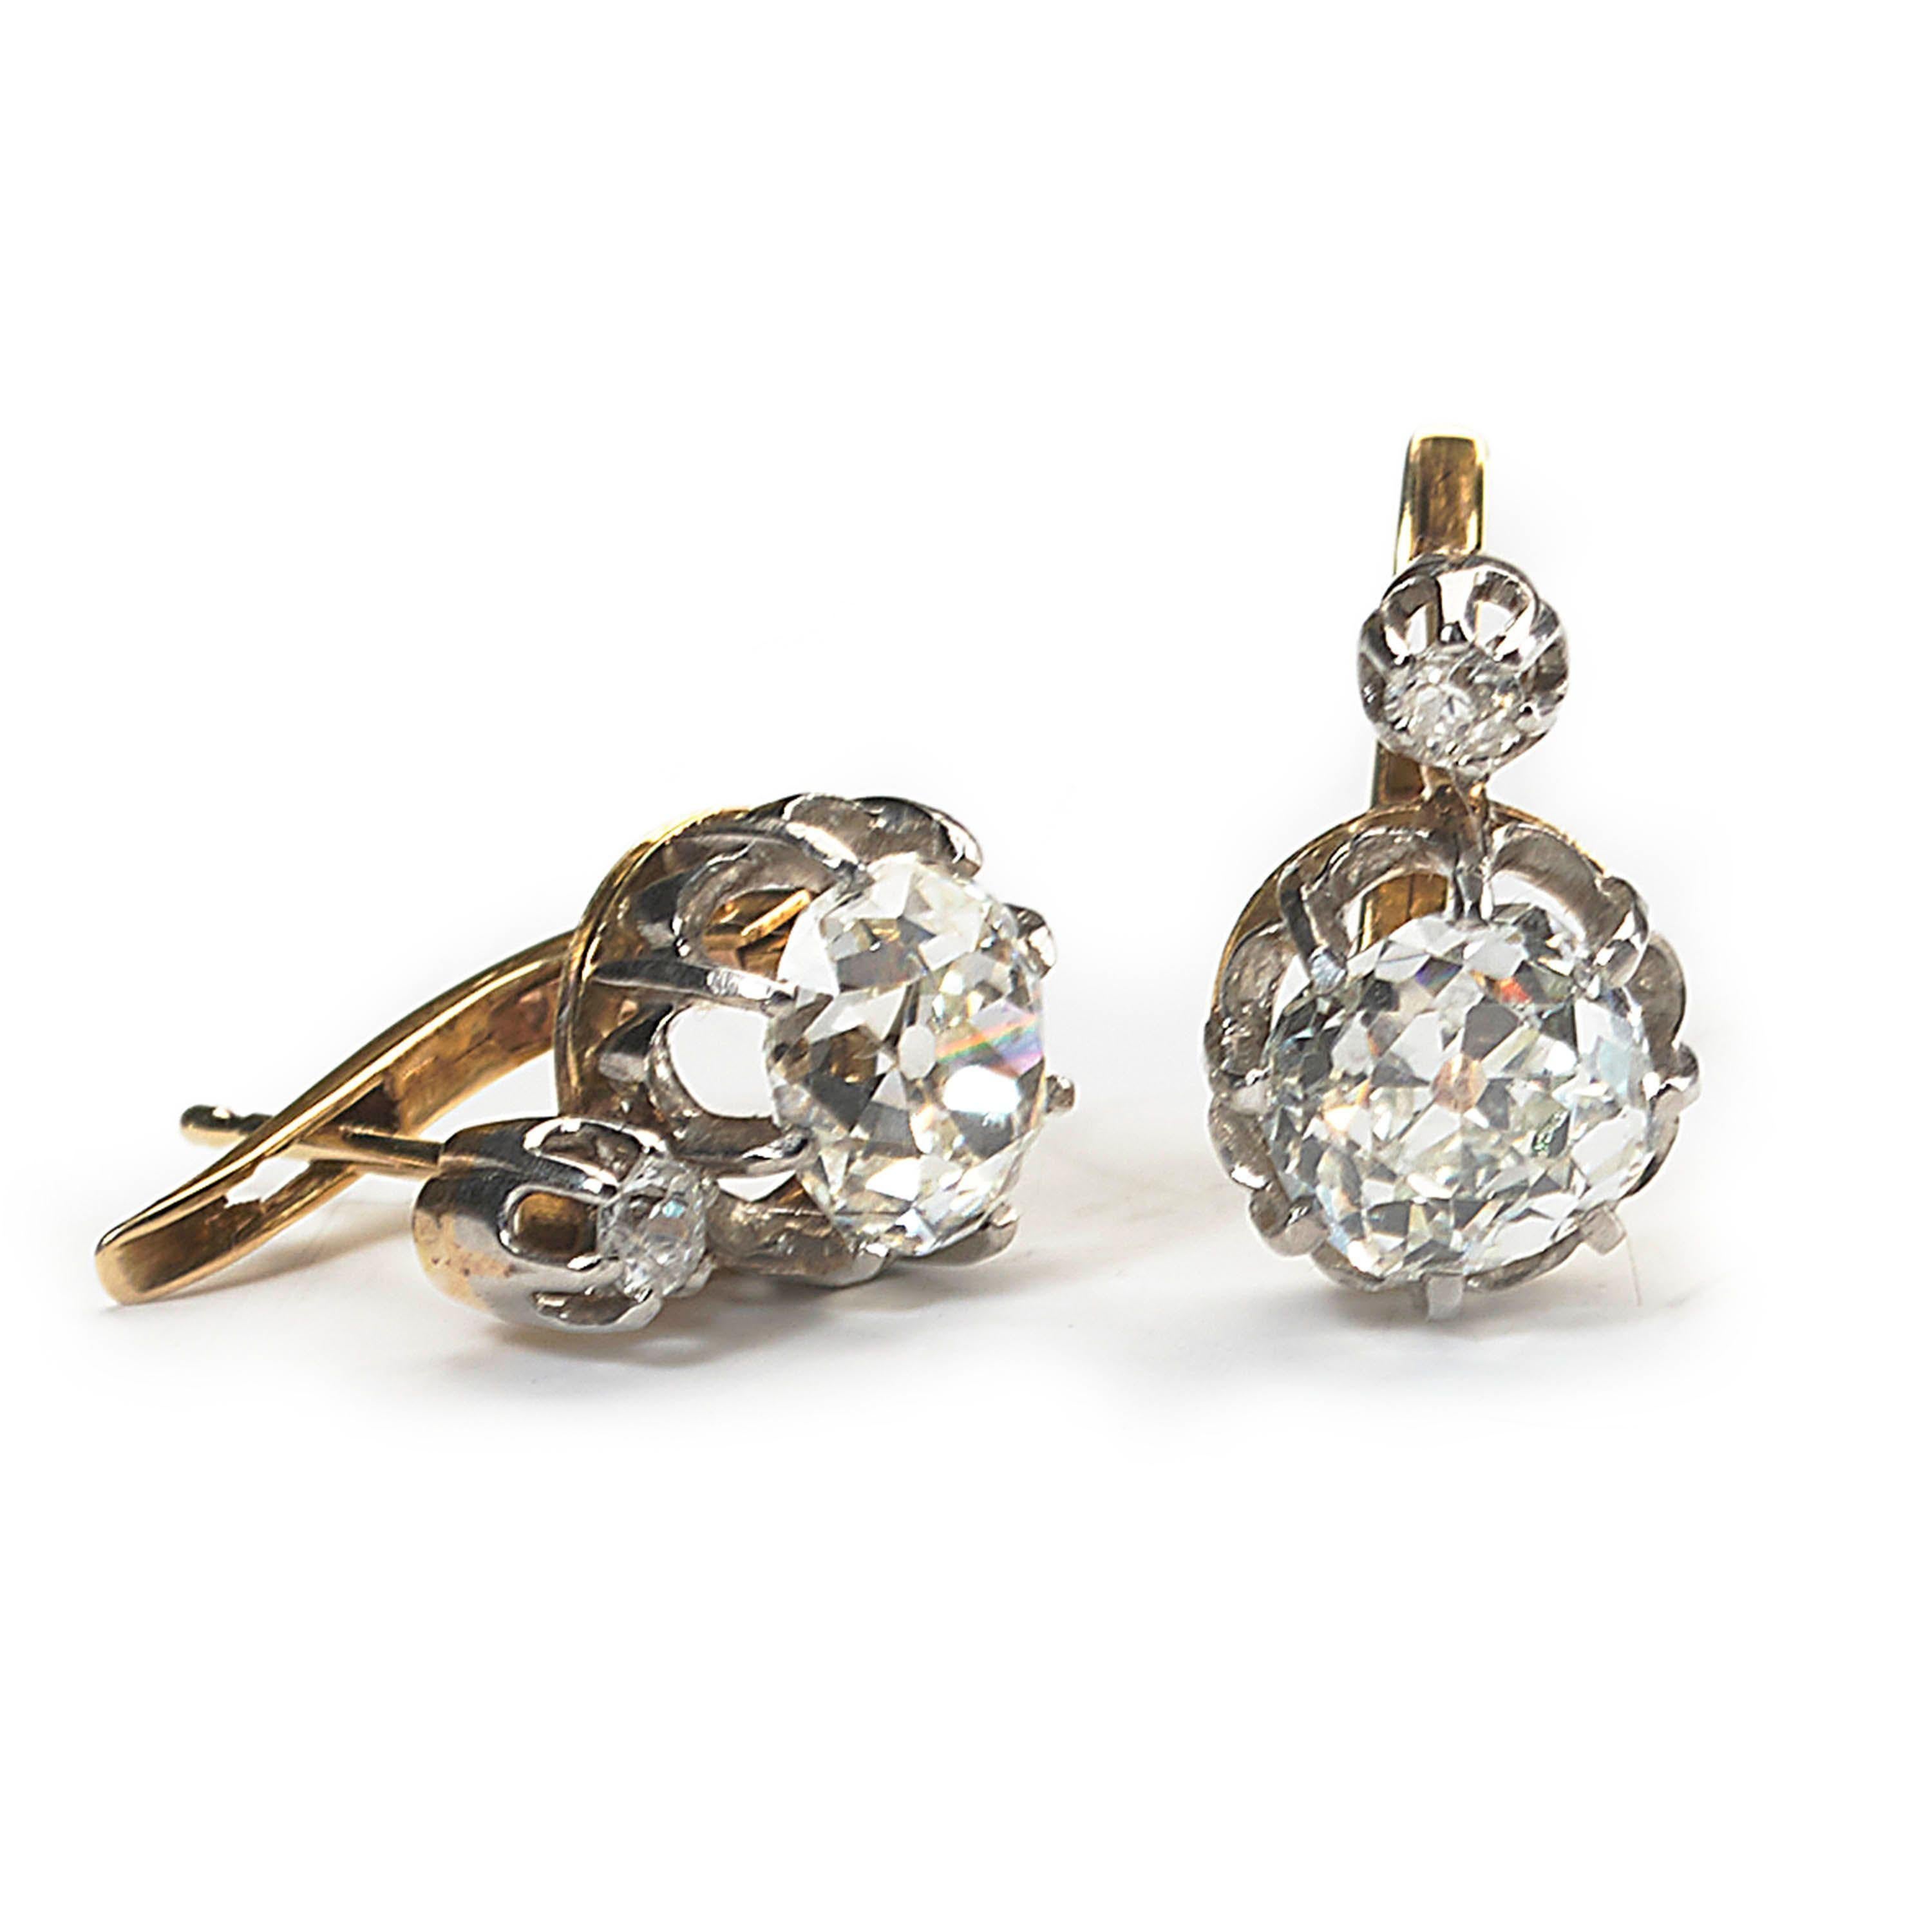 A pair of antique, cushion shaped, old-cut diamond earrings, with a pair of old European-cut diamonds, with a total weight of approximately 2.60ct, in our opinion the colour is J to K and our opinion of the clarity is VS, surmounted with single,